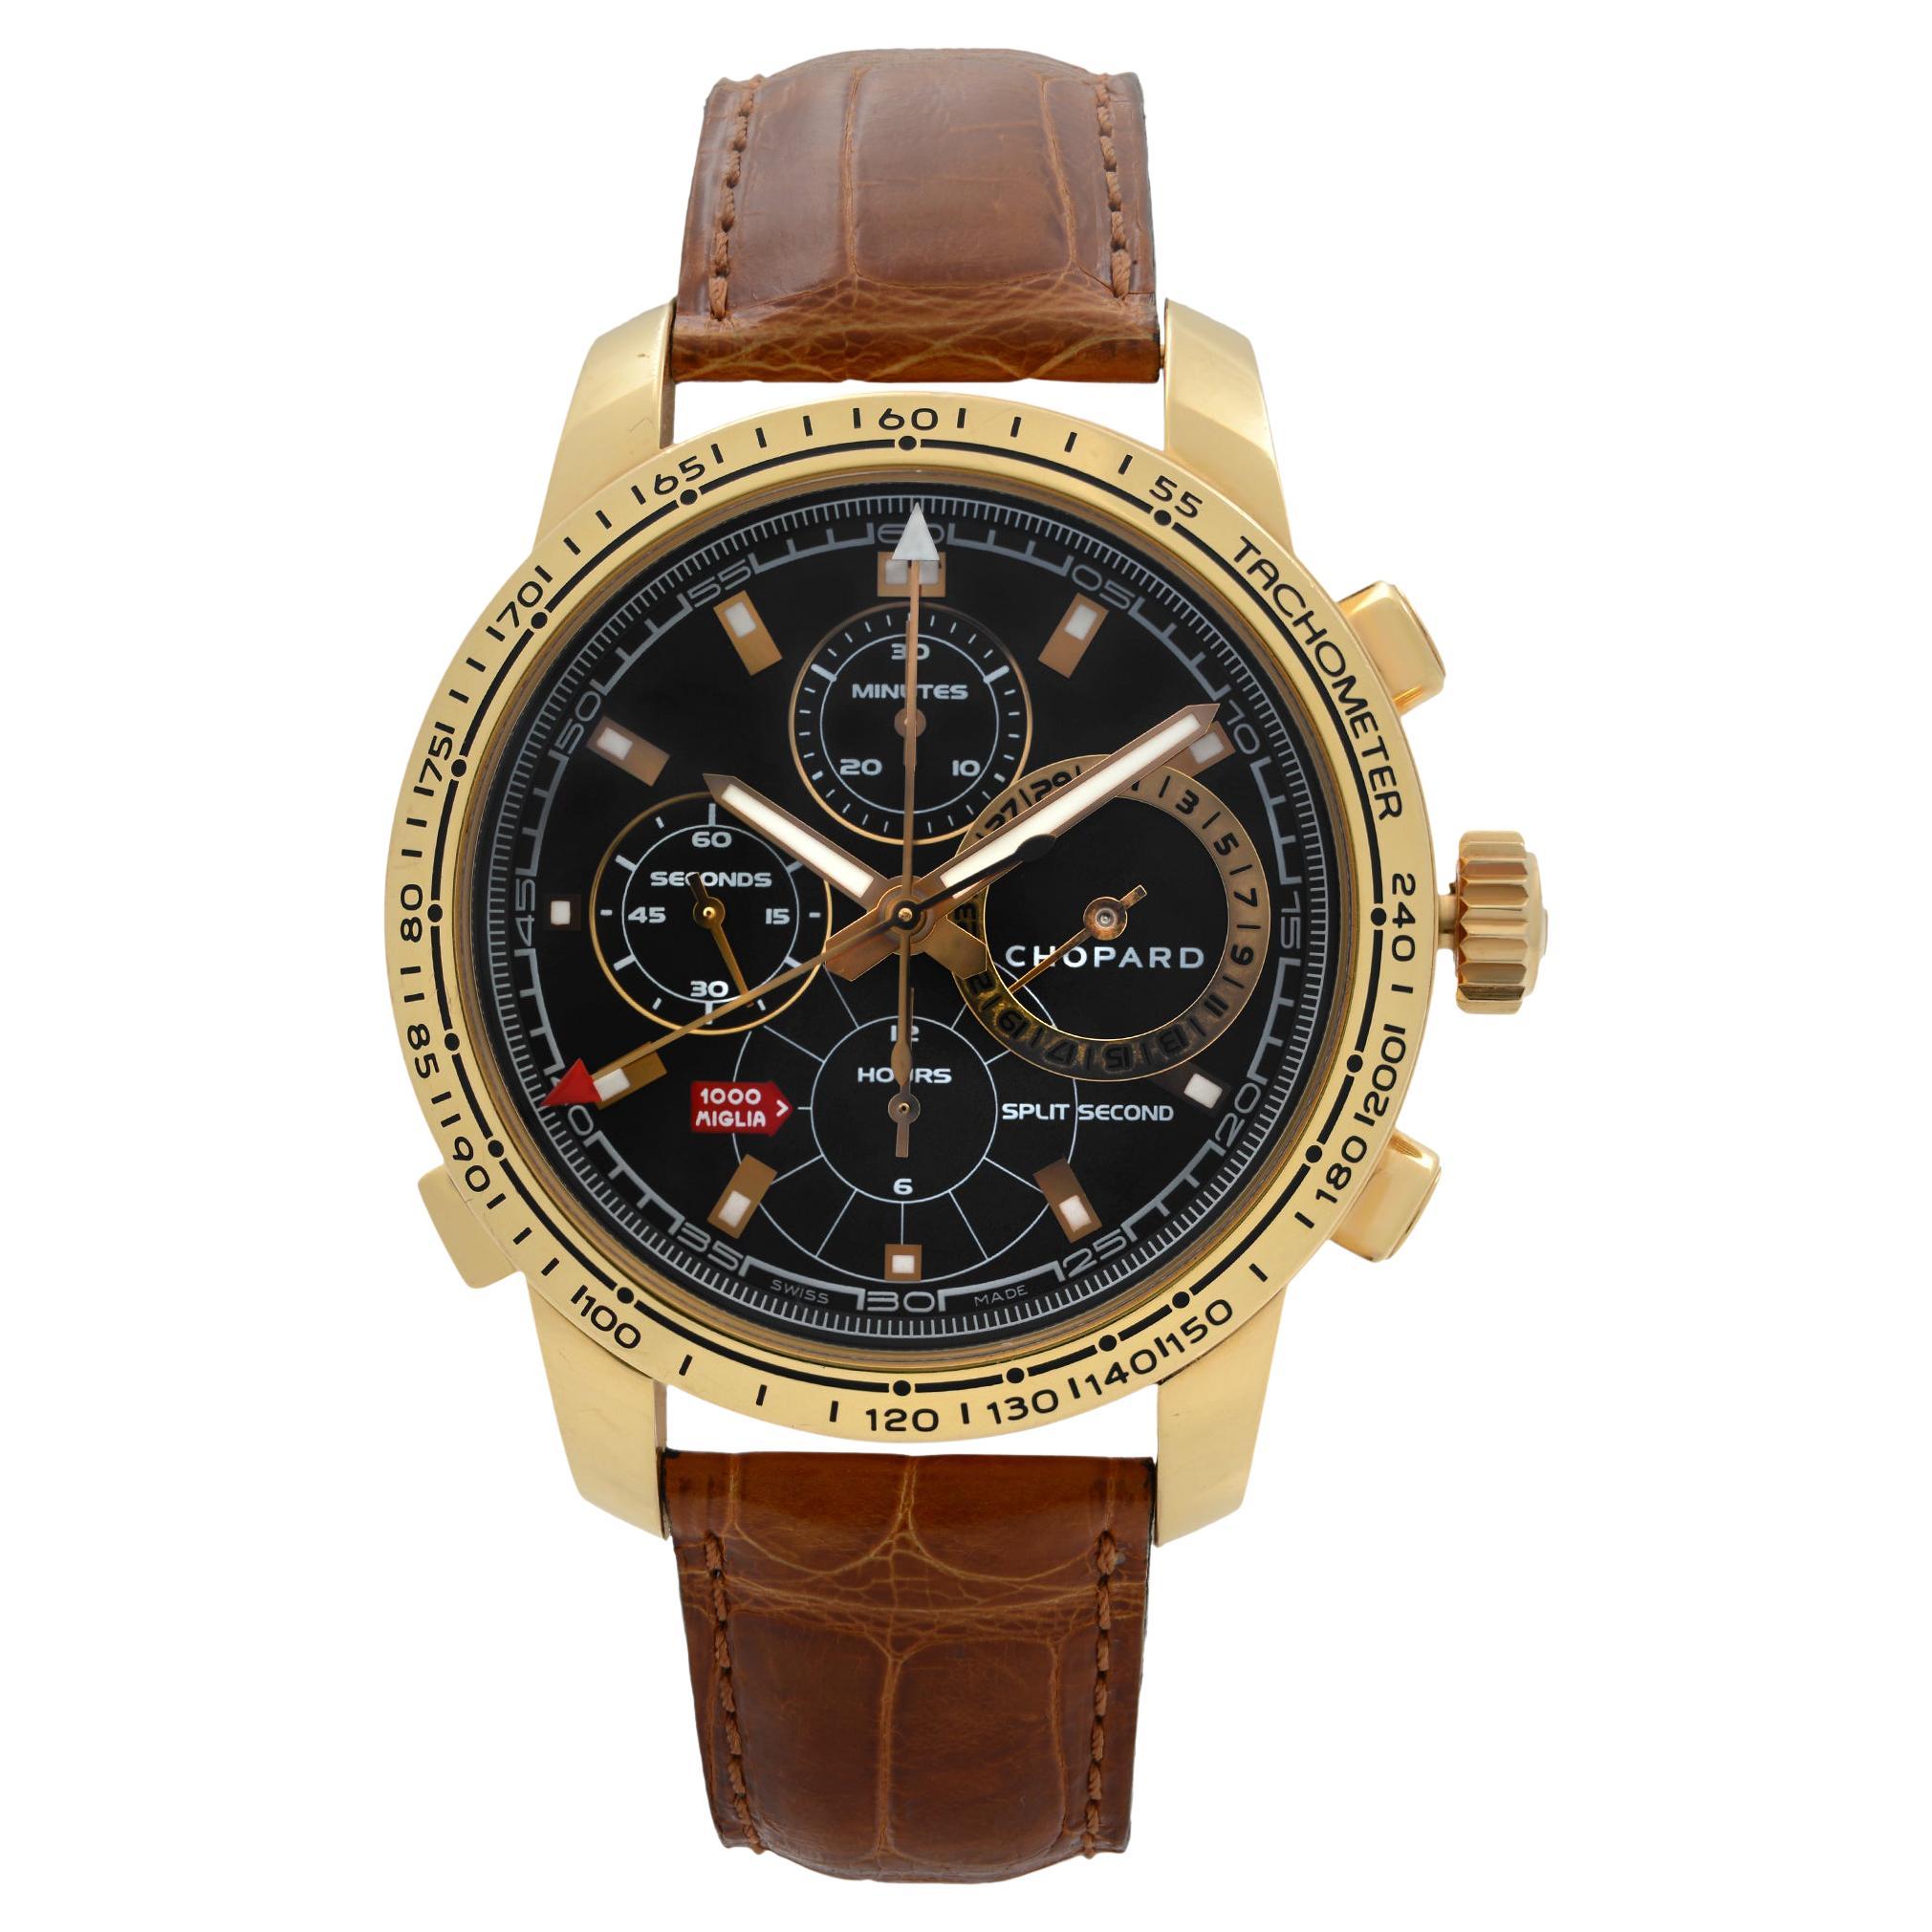 Chopard Mille Miglia Split Second Chronograph Limited Edition Watch 16/1261 For Sale